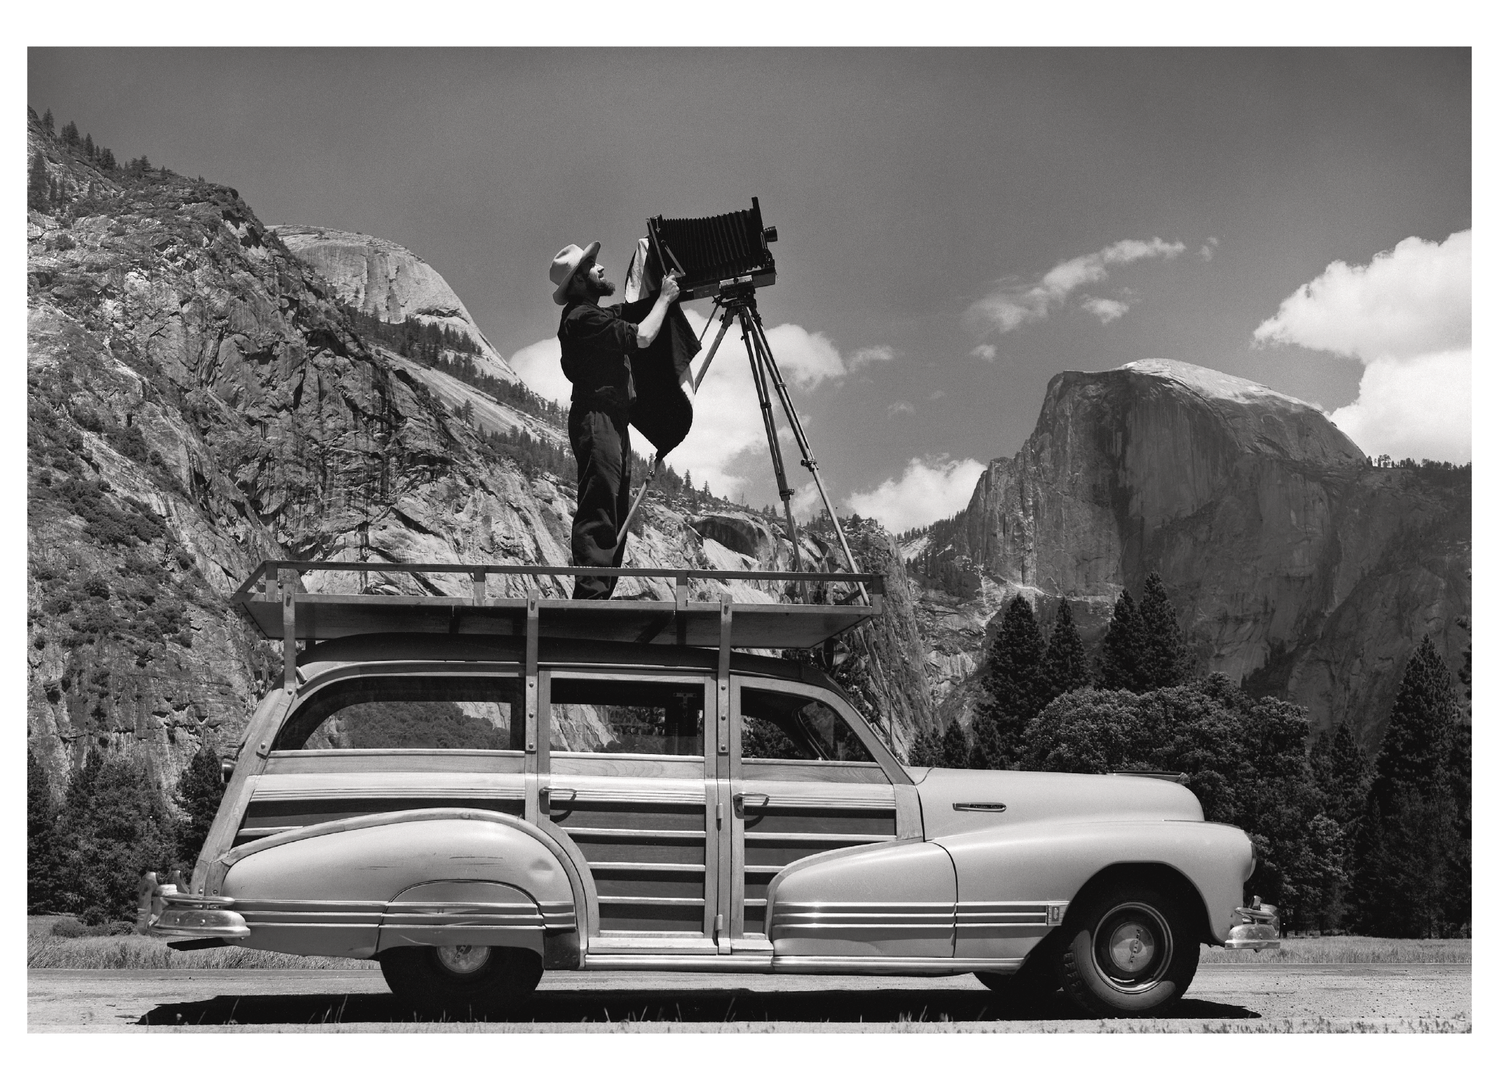 ANSEL ADAMS PHOTOGRAPHING IN YOSEMITE - CEDRIC WRIGHT SMALL MATTED REPRODUCTION